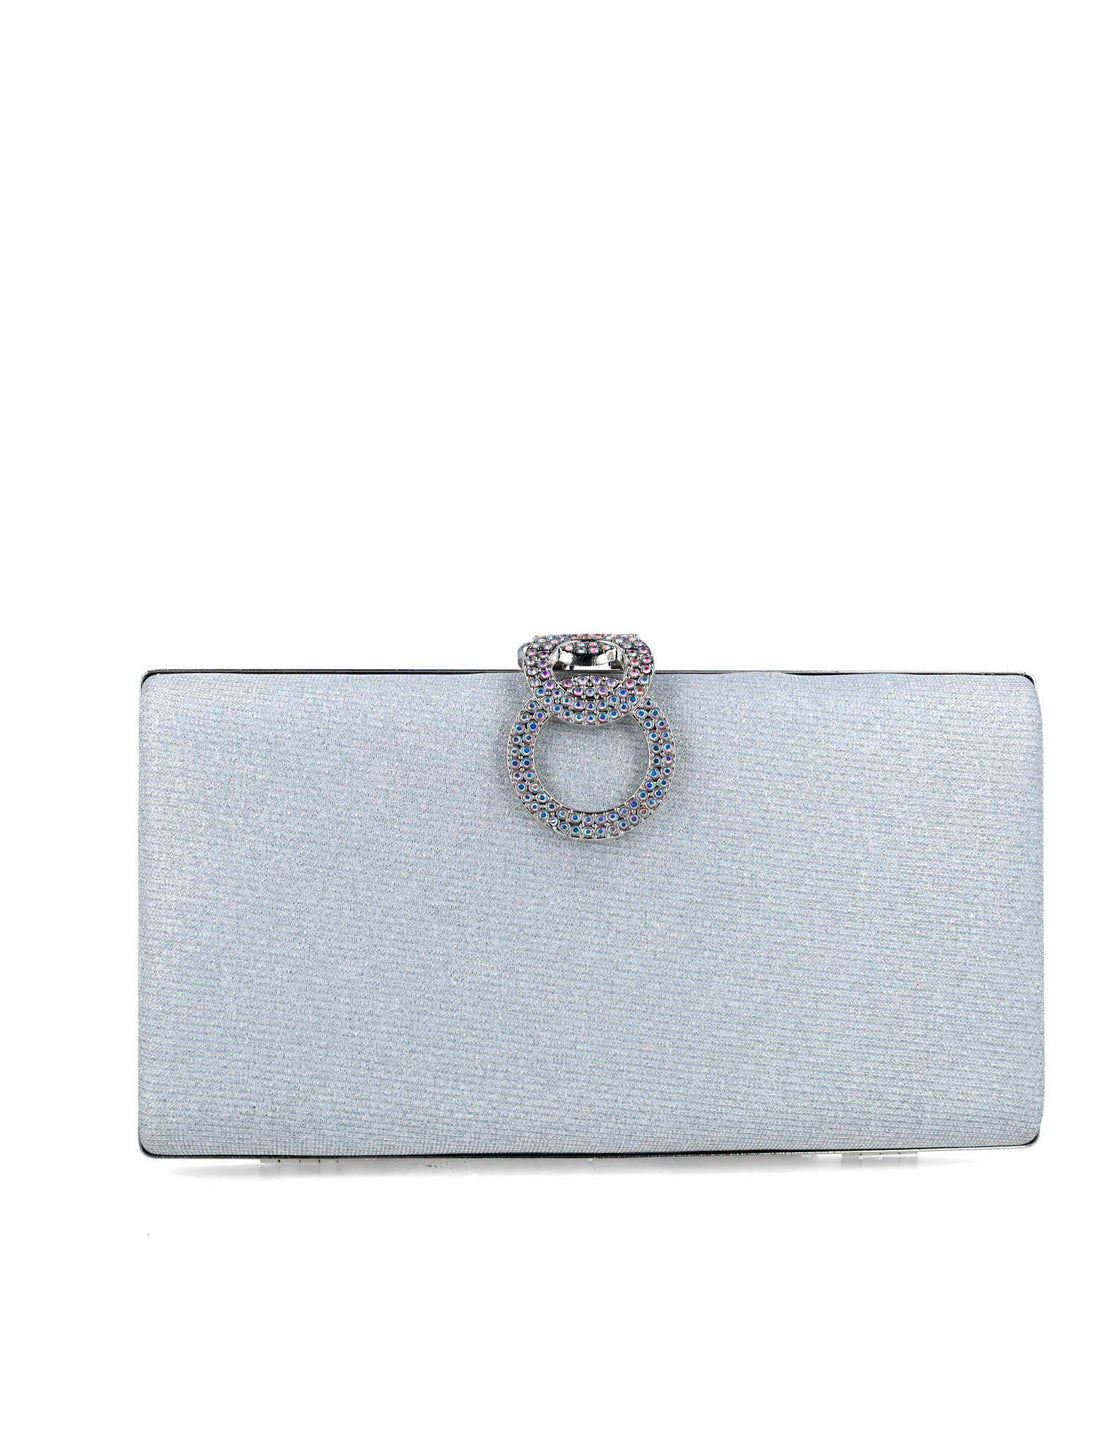 Shimmery Clutch With Embellished Hardware_85479_09_01